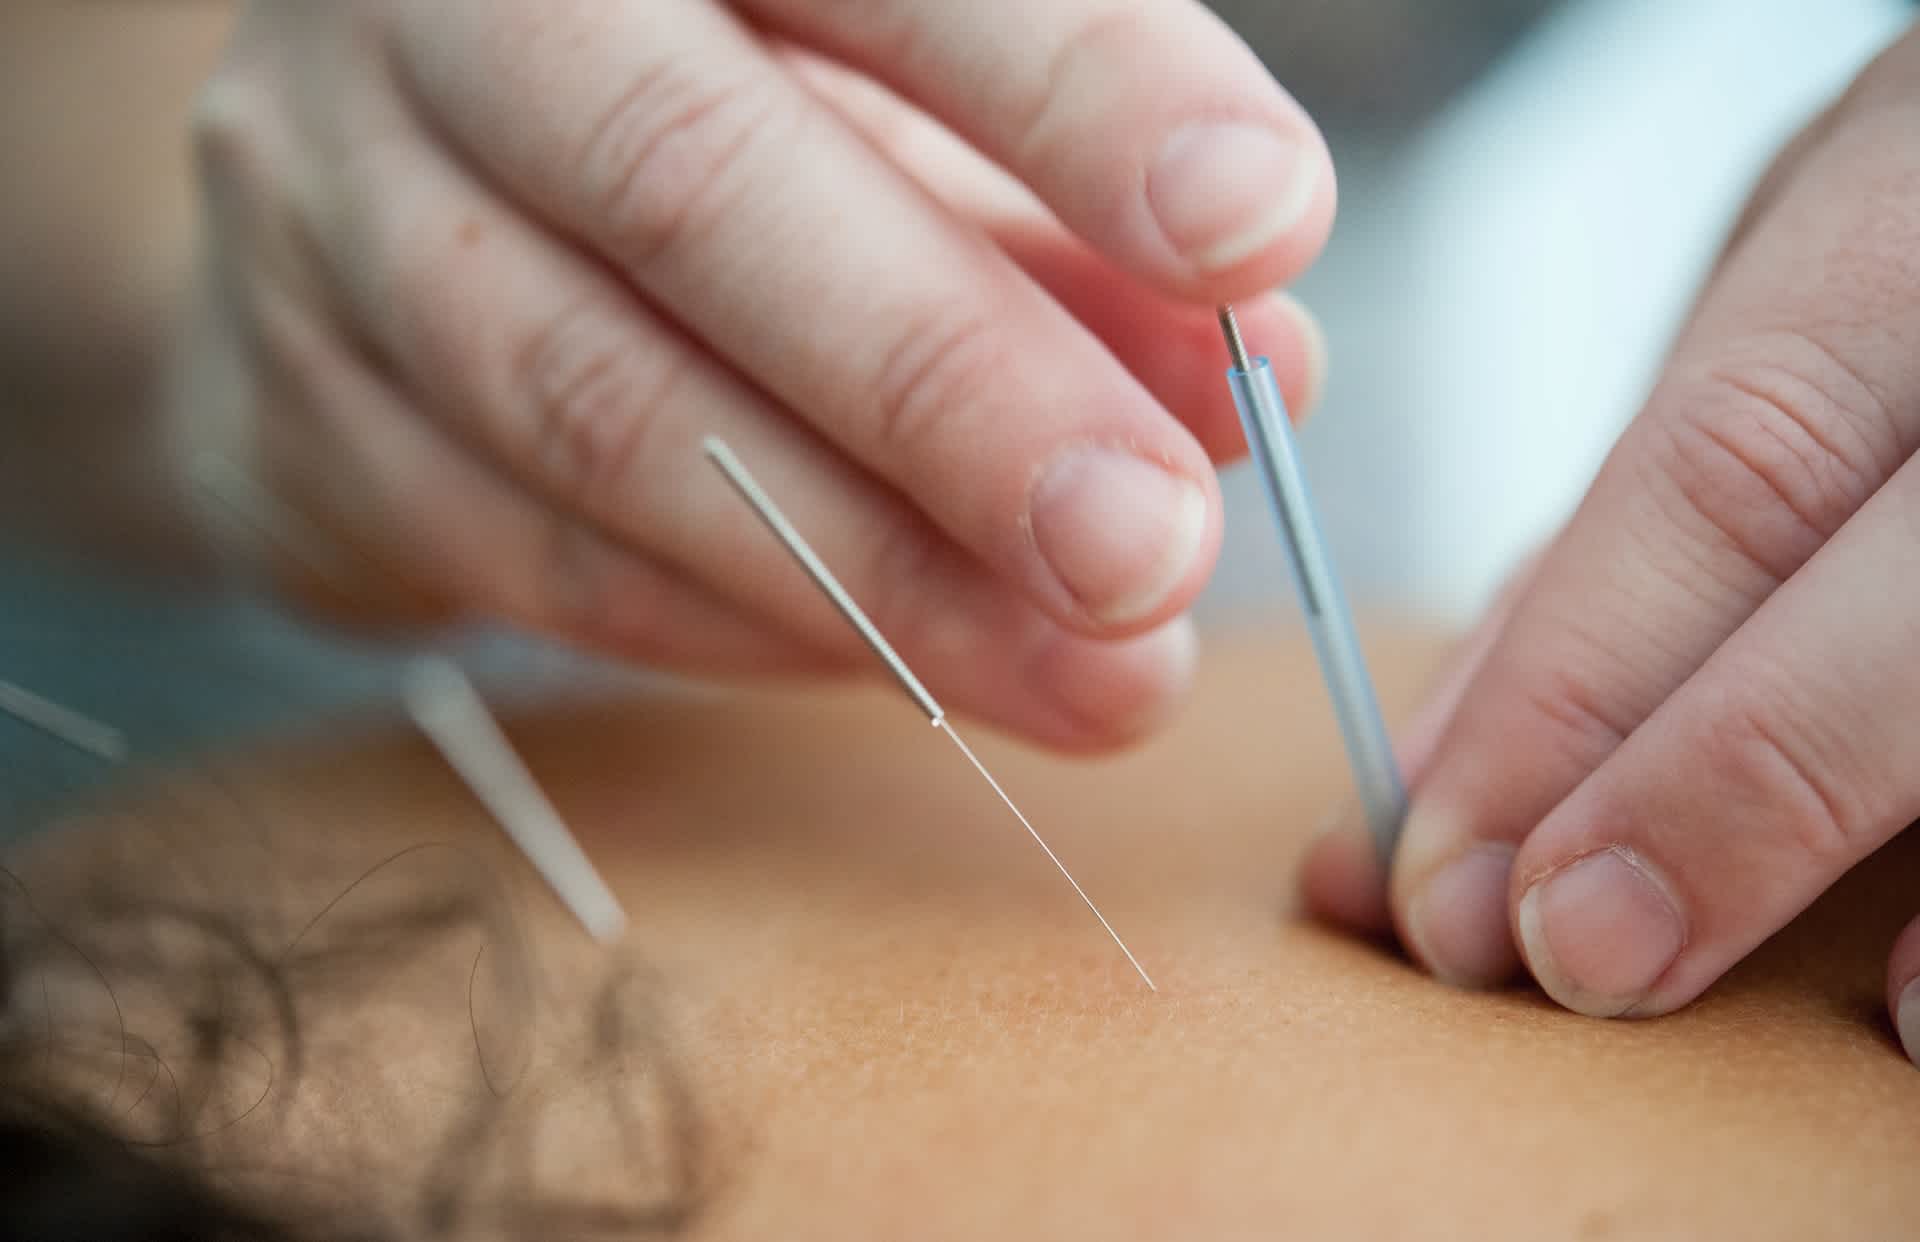 Acupuncture needles being inserted into person's back